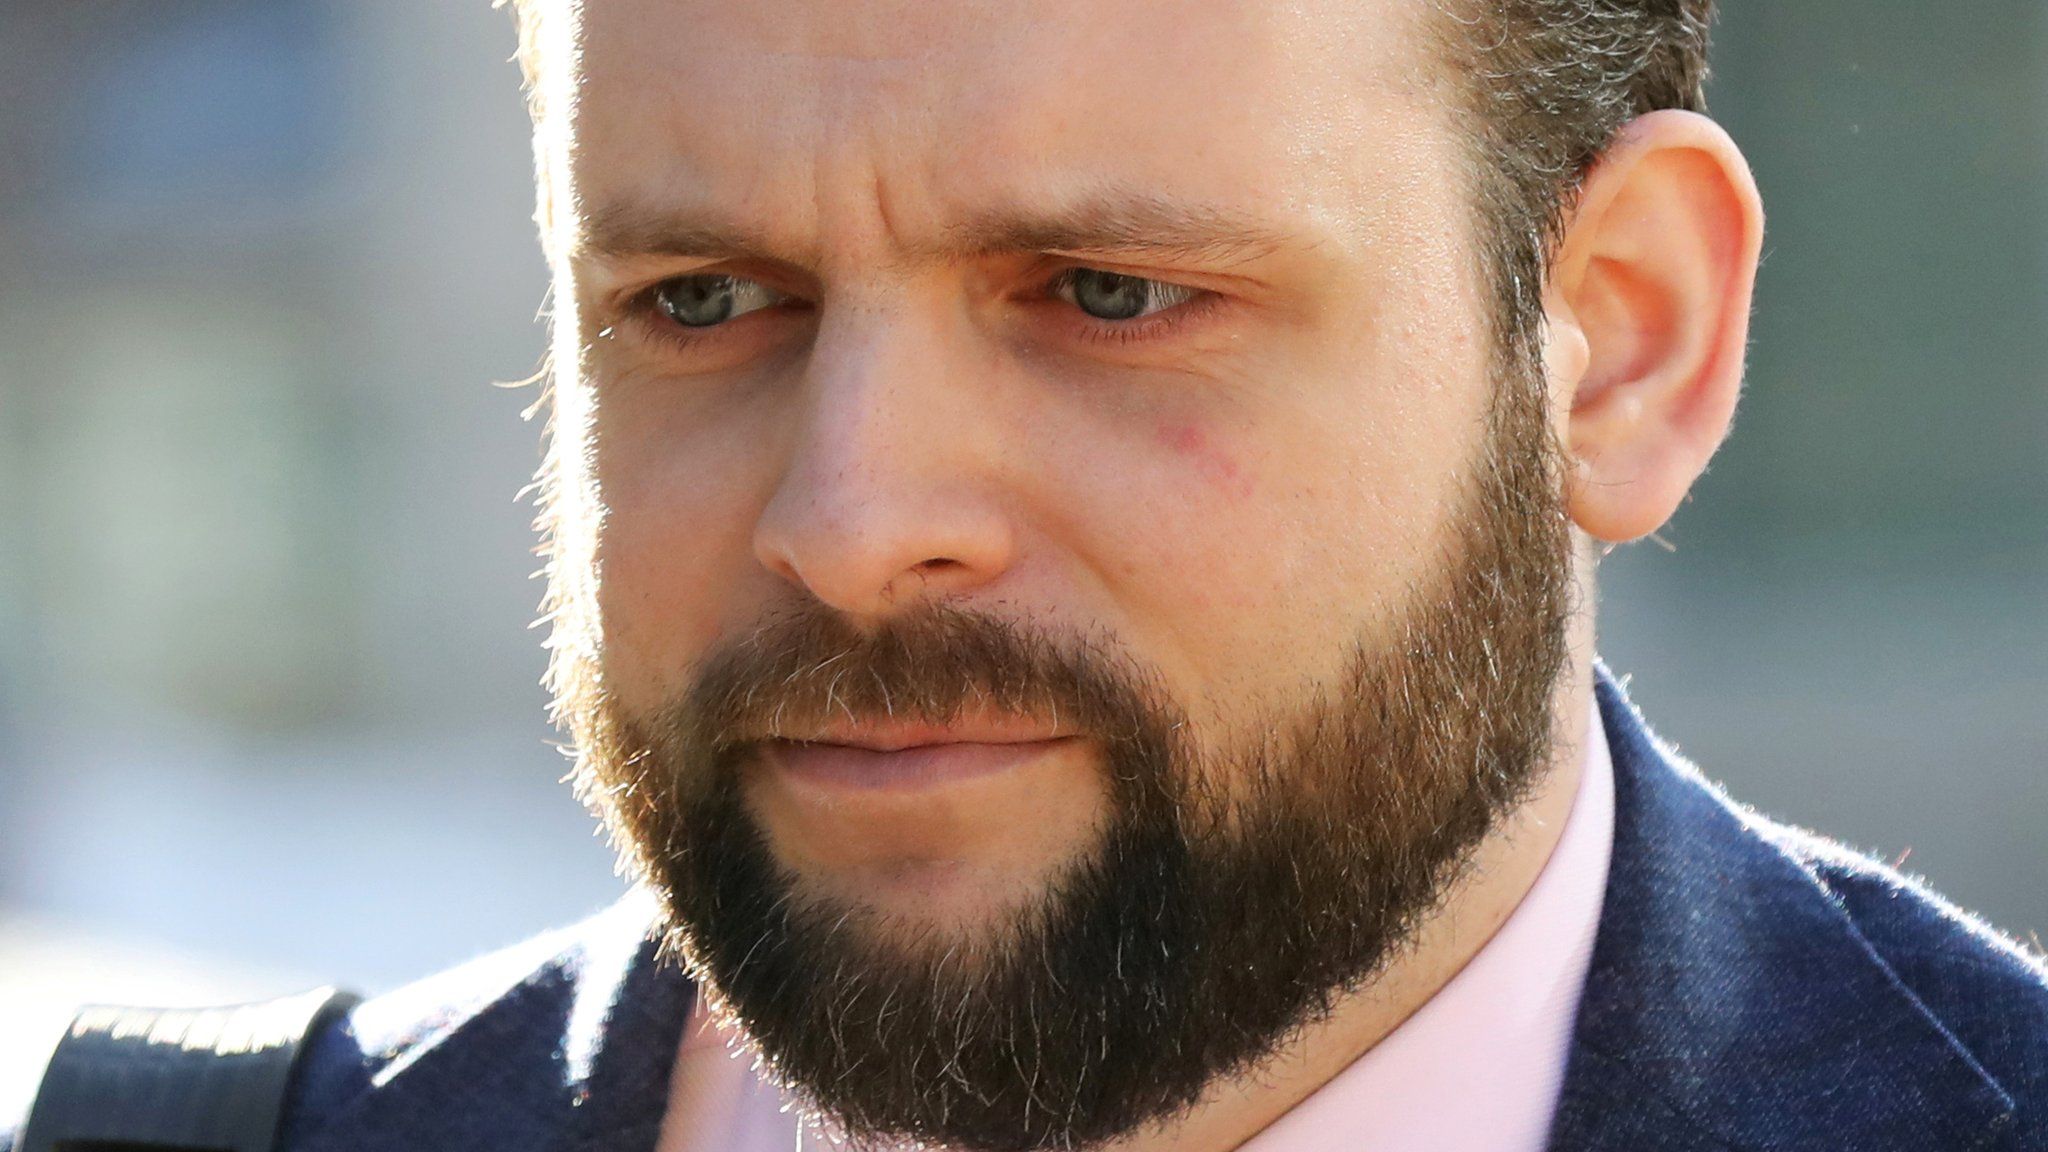 Joshua Boyle arrives for the first day of his trial at the courthouse in Ottawa, Ontario, Canada, March 25, 2019